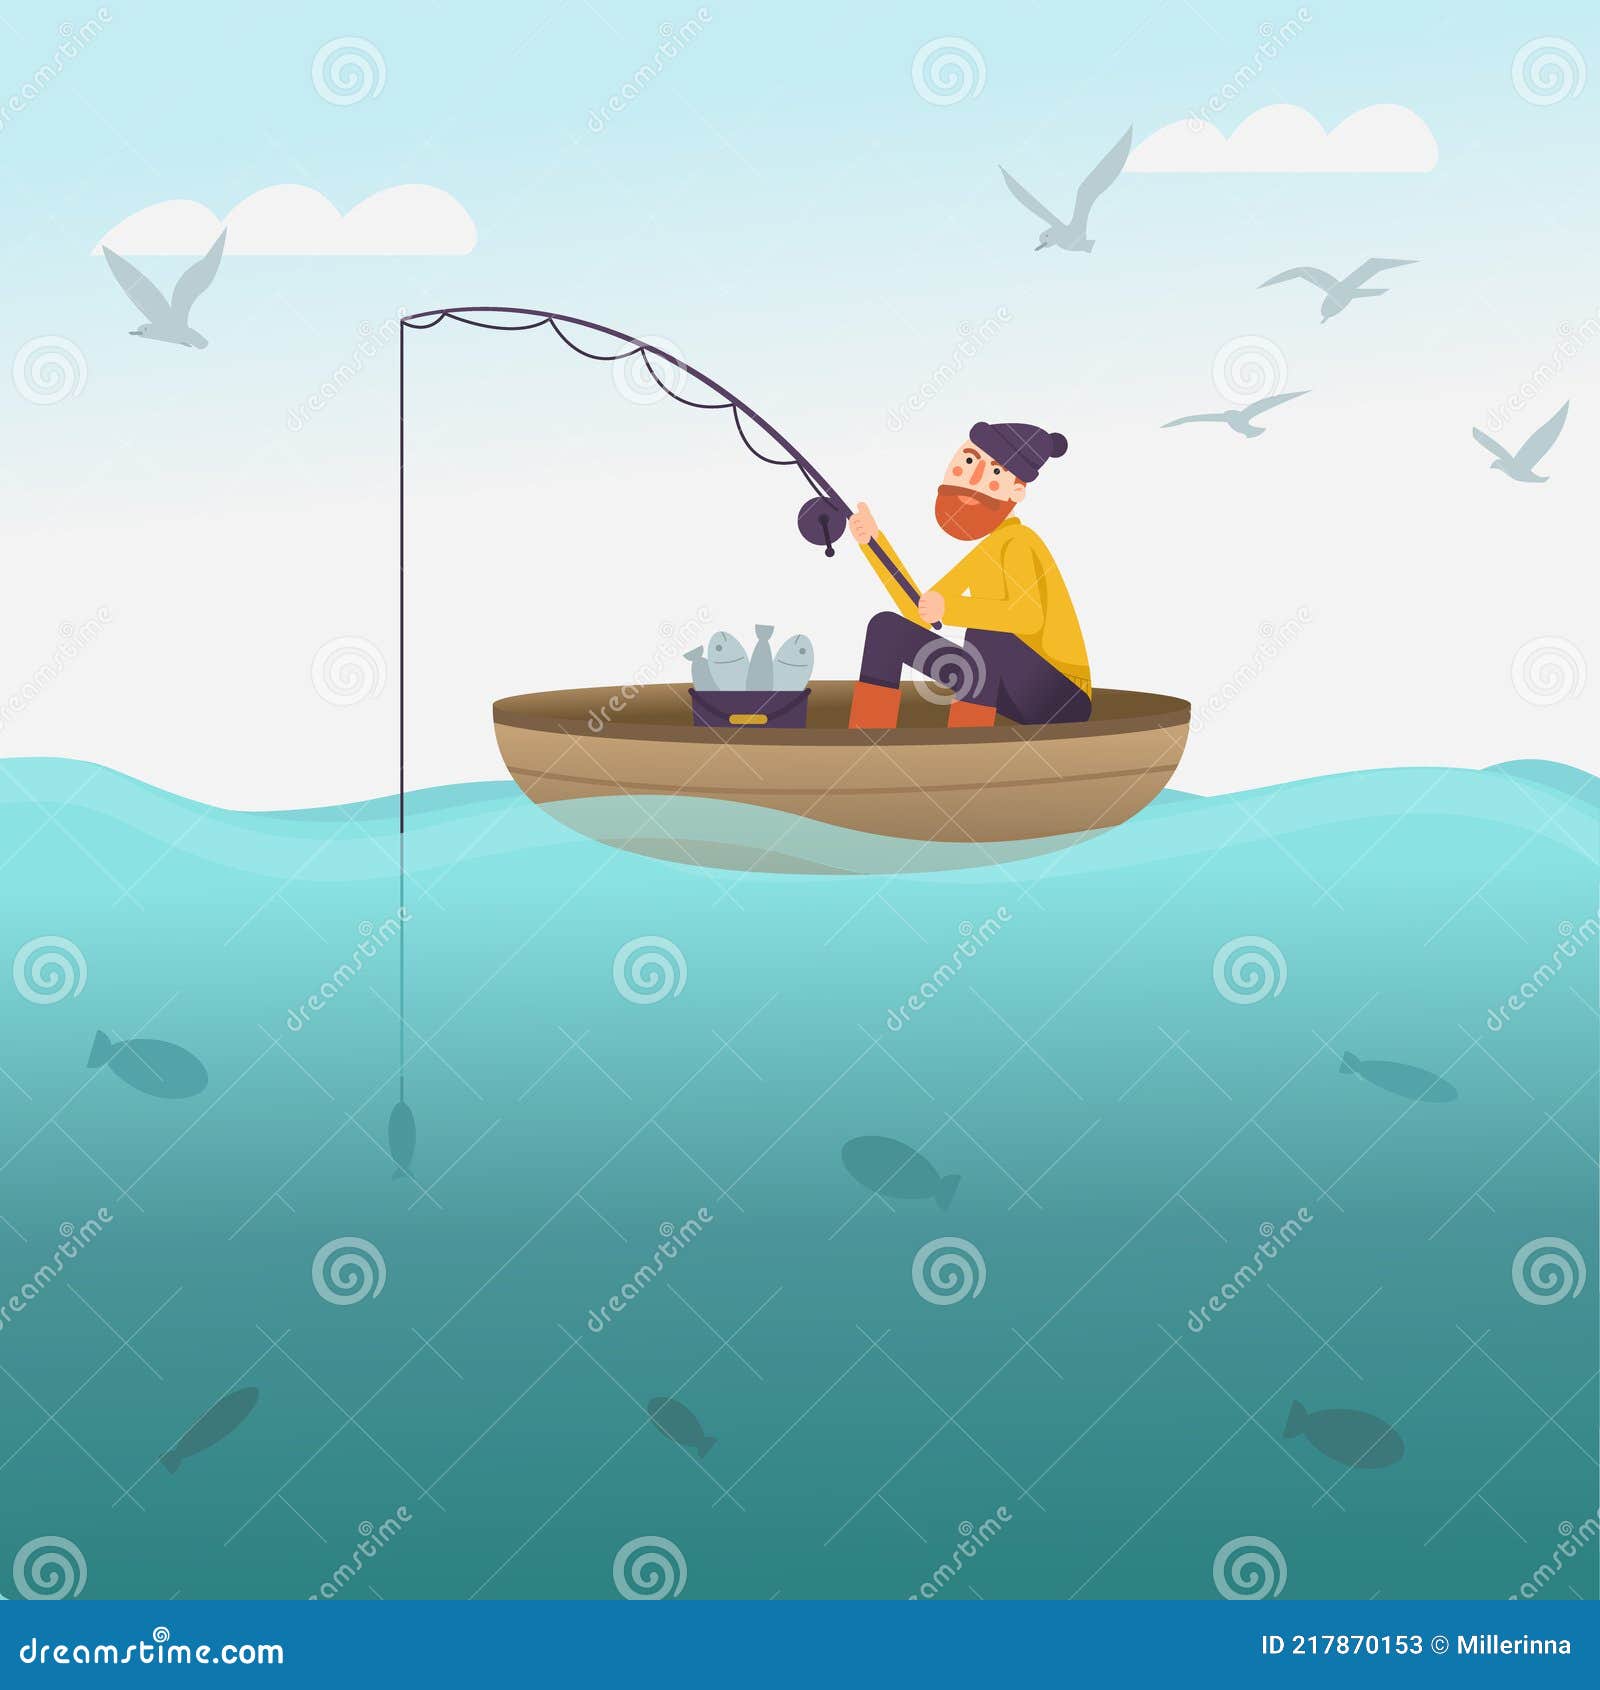 Fisherman with Fishing Rod on the Boat. Sea Scenery with Fisher Catching  Fish for Kids Book Stock Vector - Illustration of seagulls, lure: 217870153